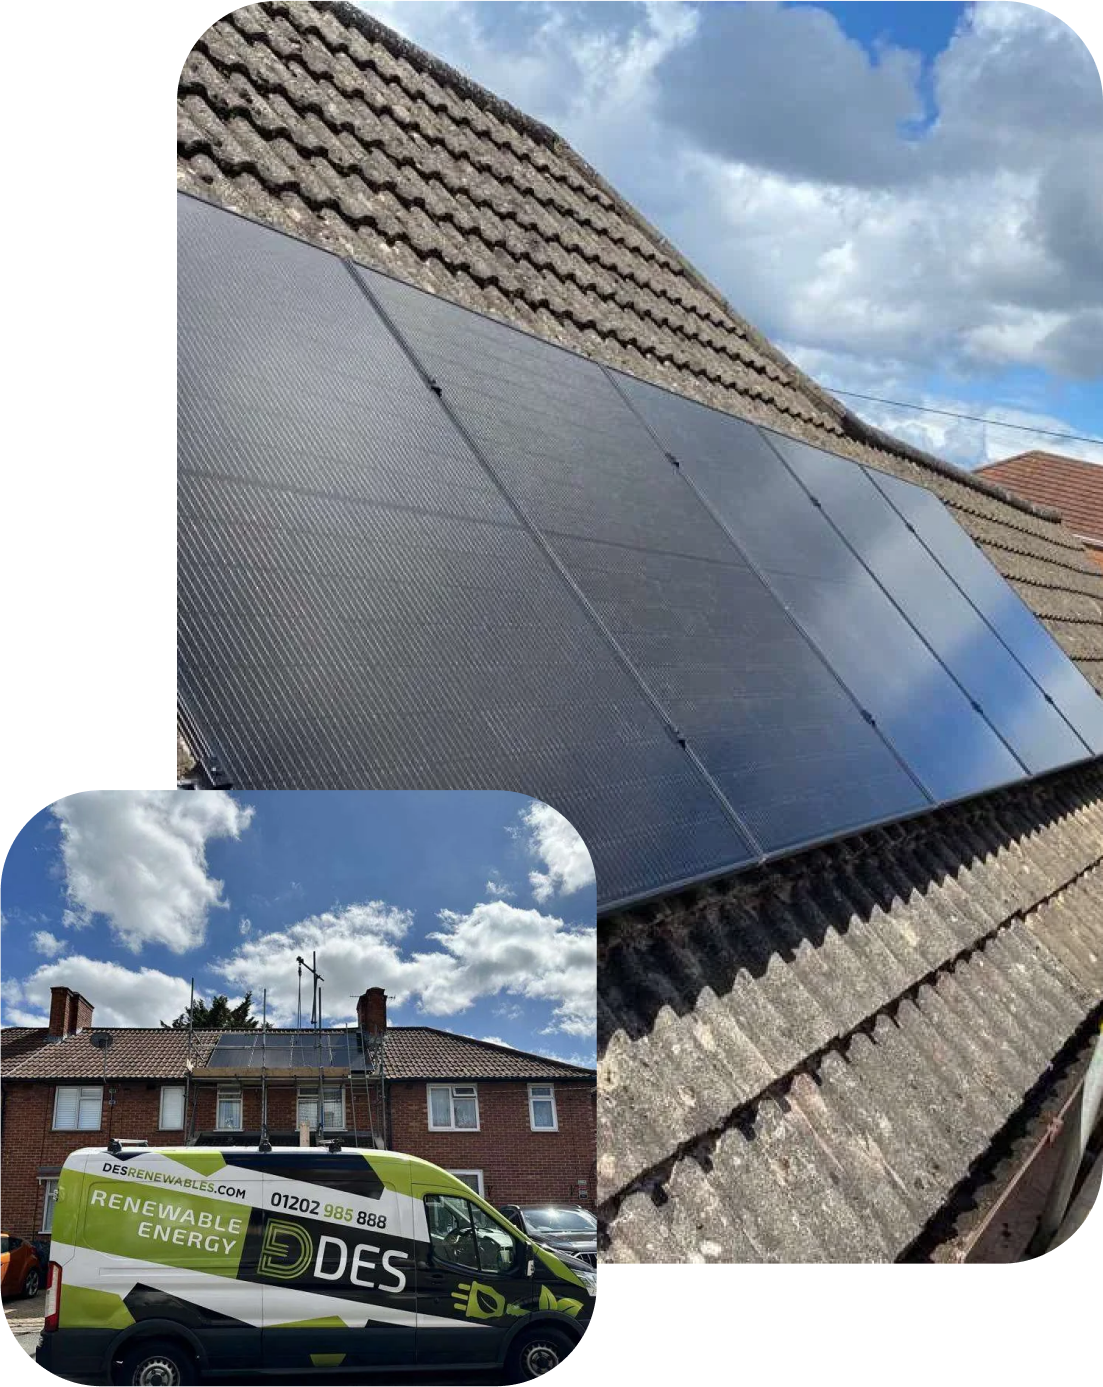 Comparison of solar panels on roof